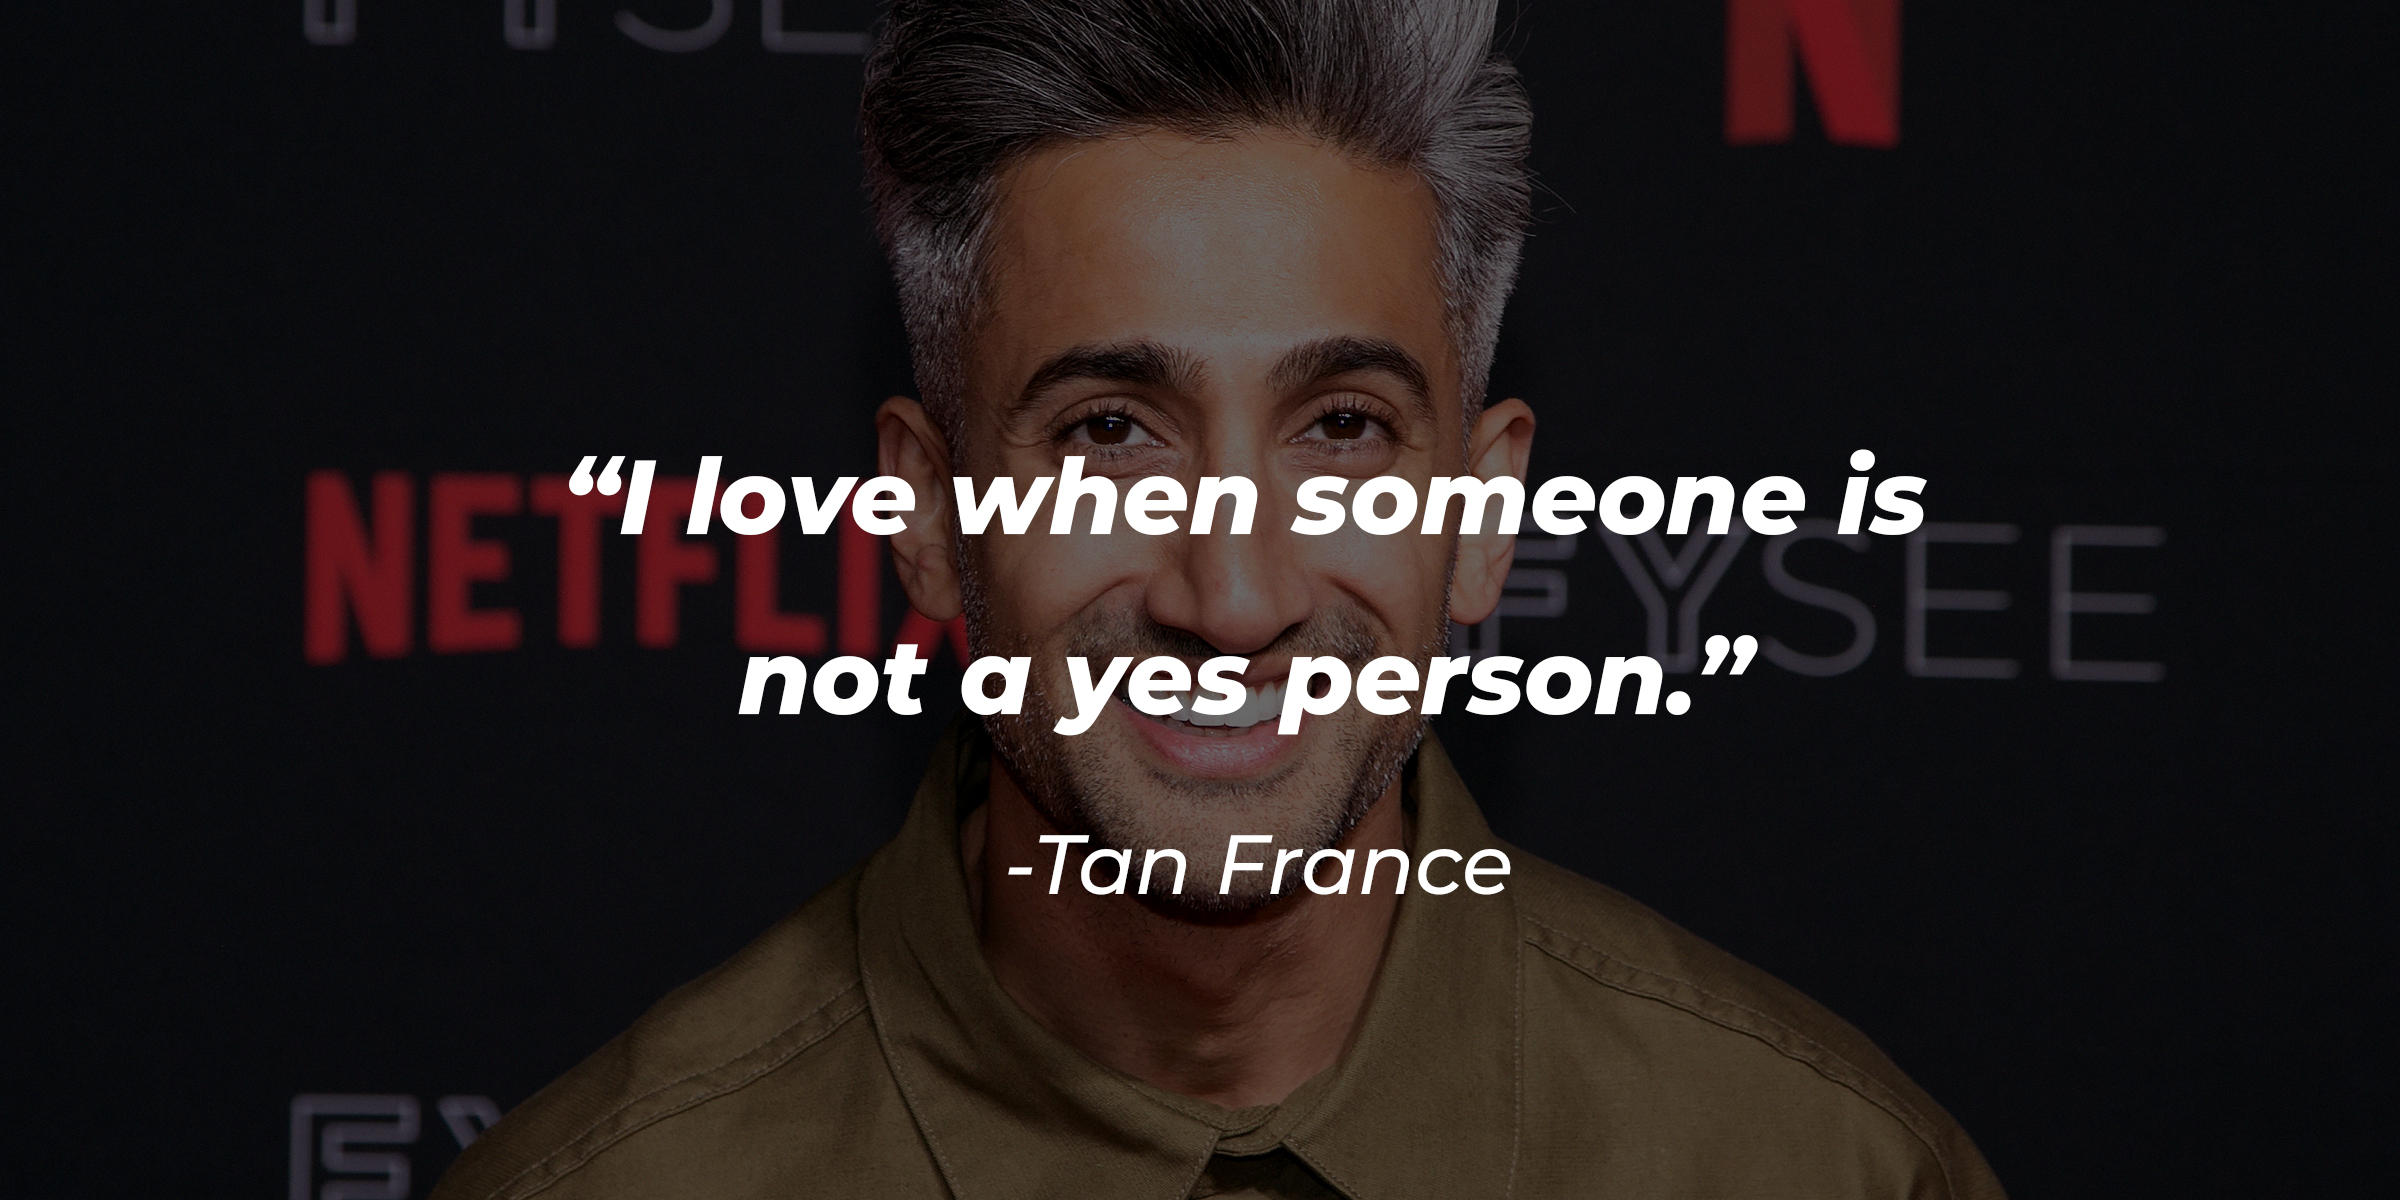 Tan France with his quote: "I love when someone is not a yes person." | Source: Getty Images